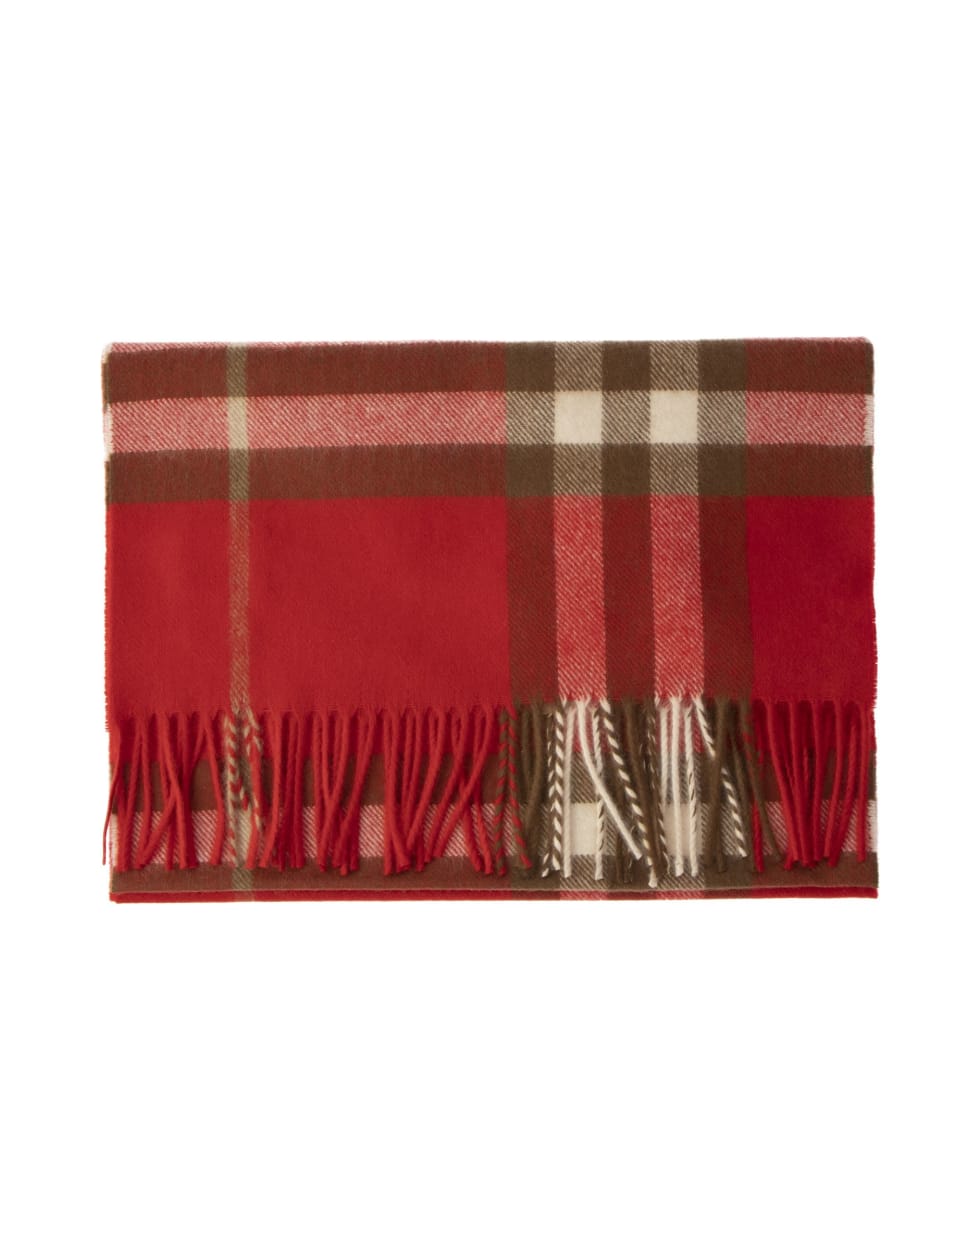 Burberry The Classic Check Cashmere Scarf - Red